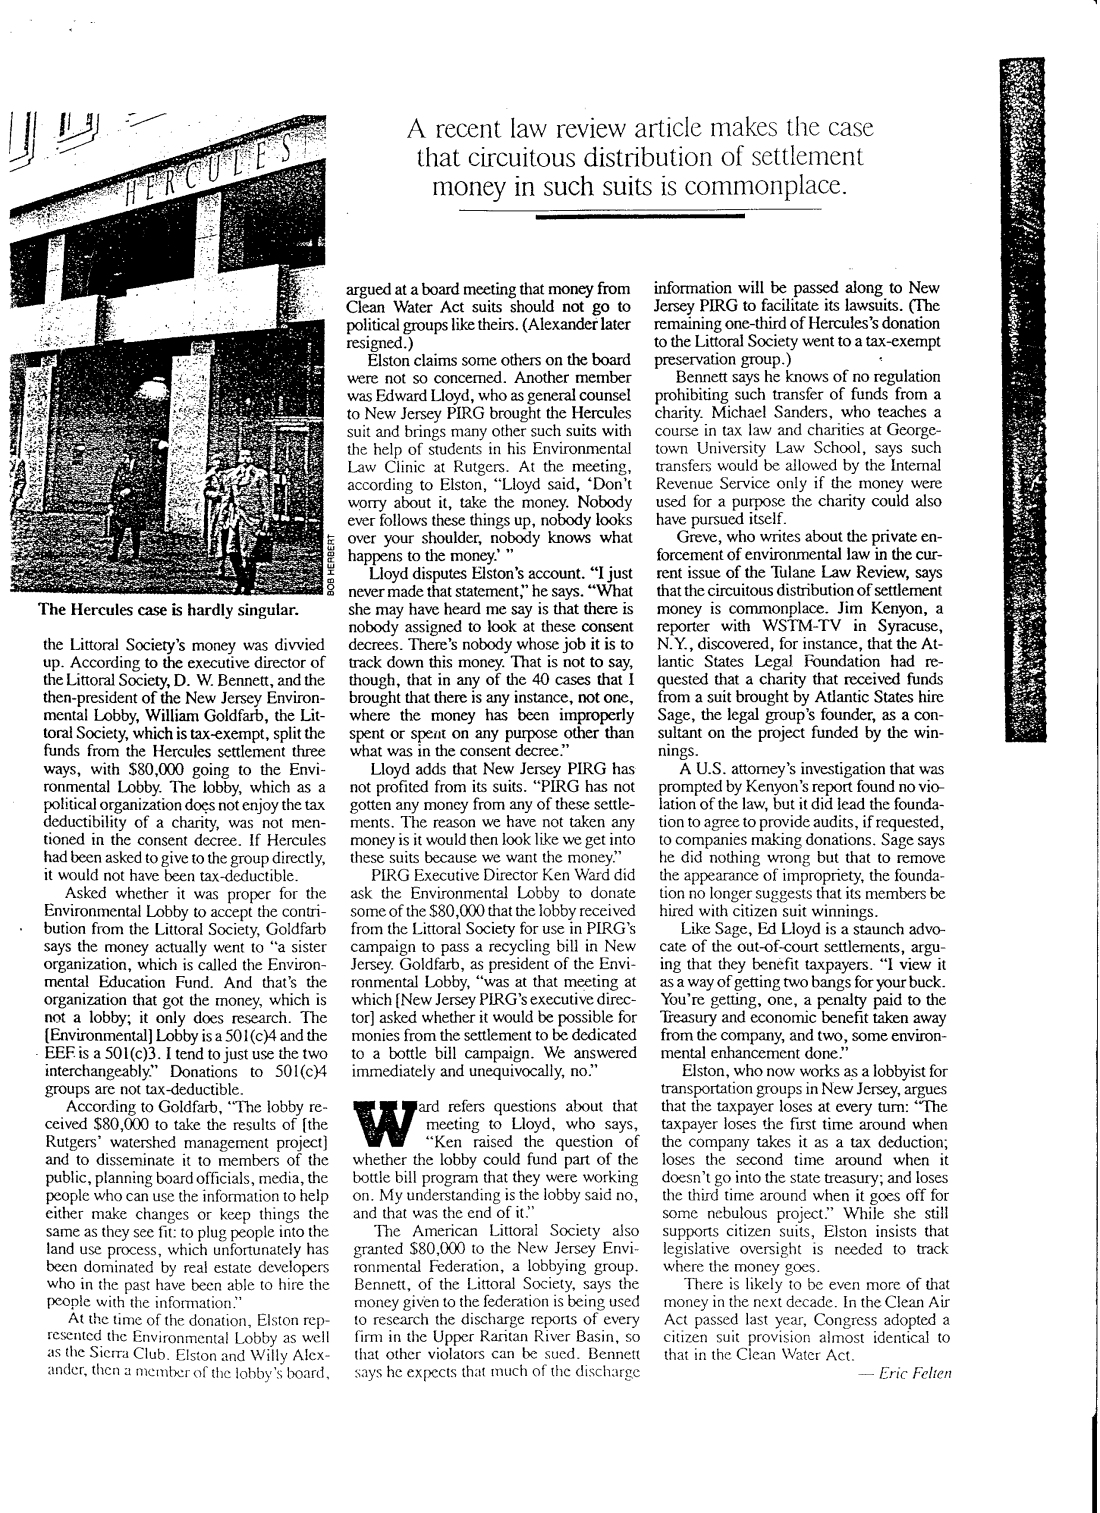 insight-article-1991-3